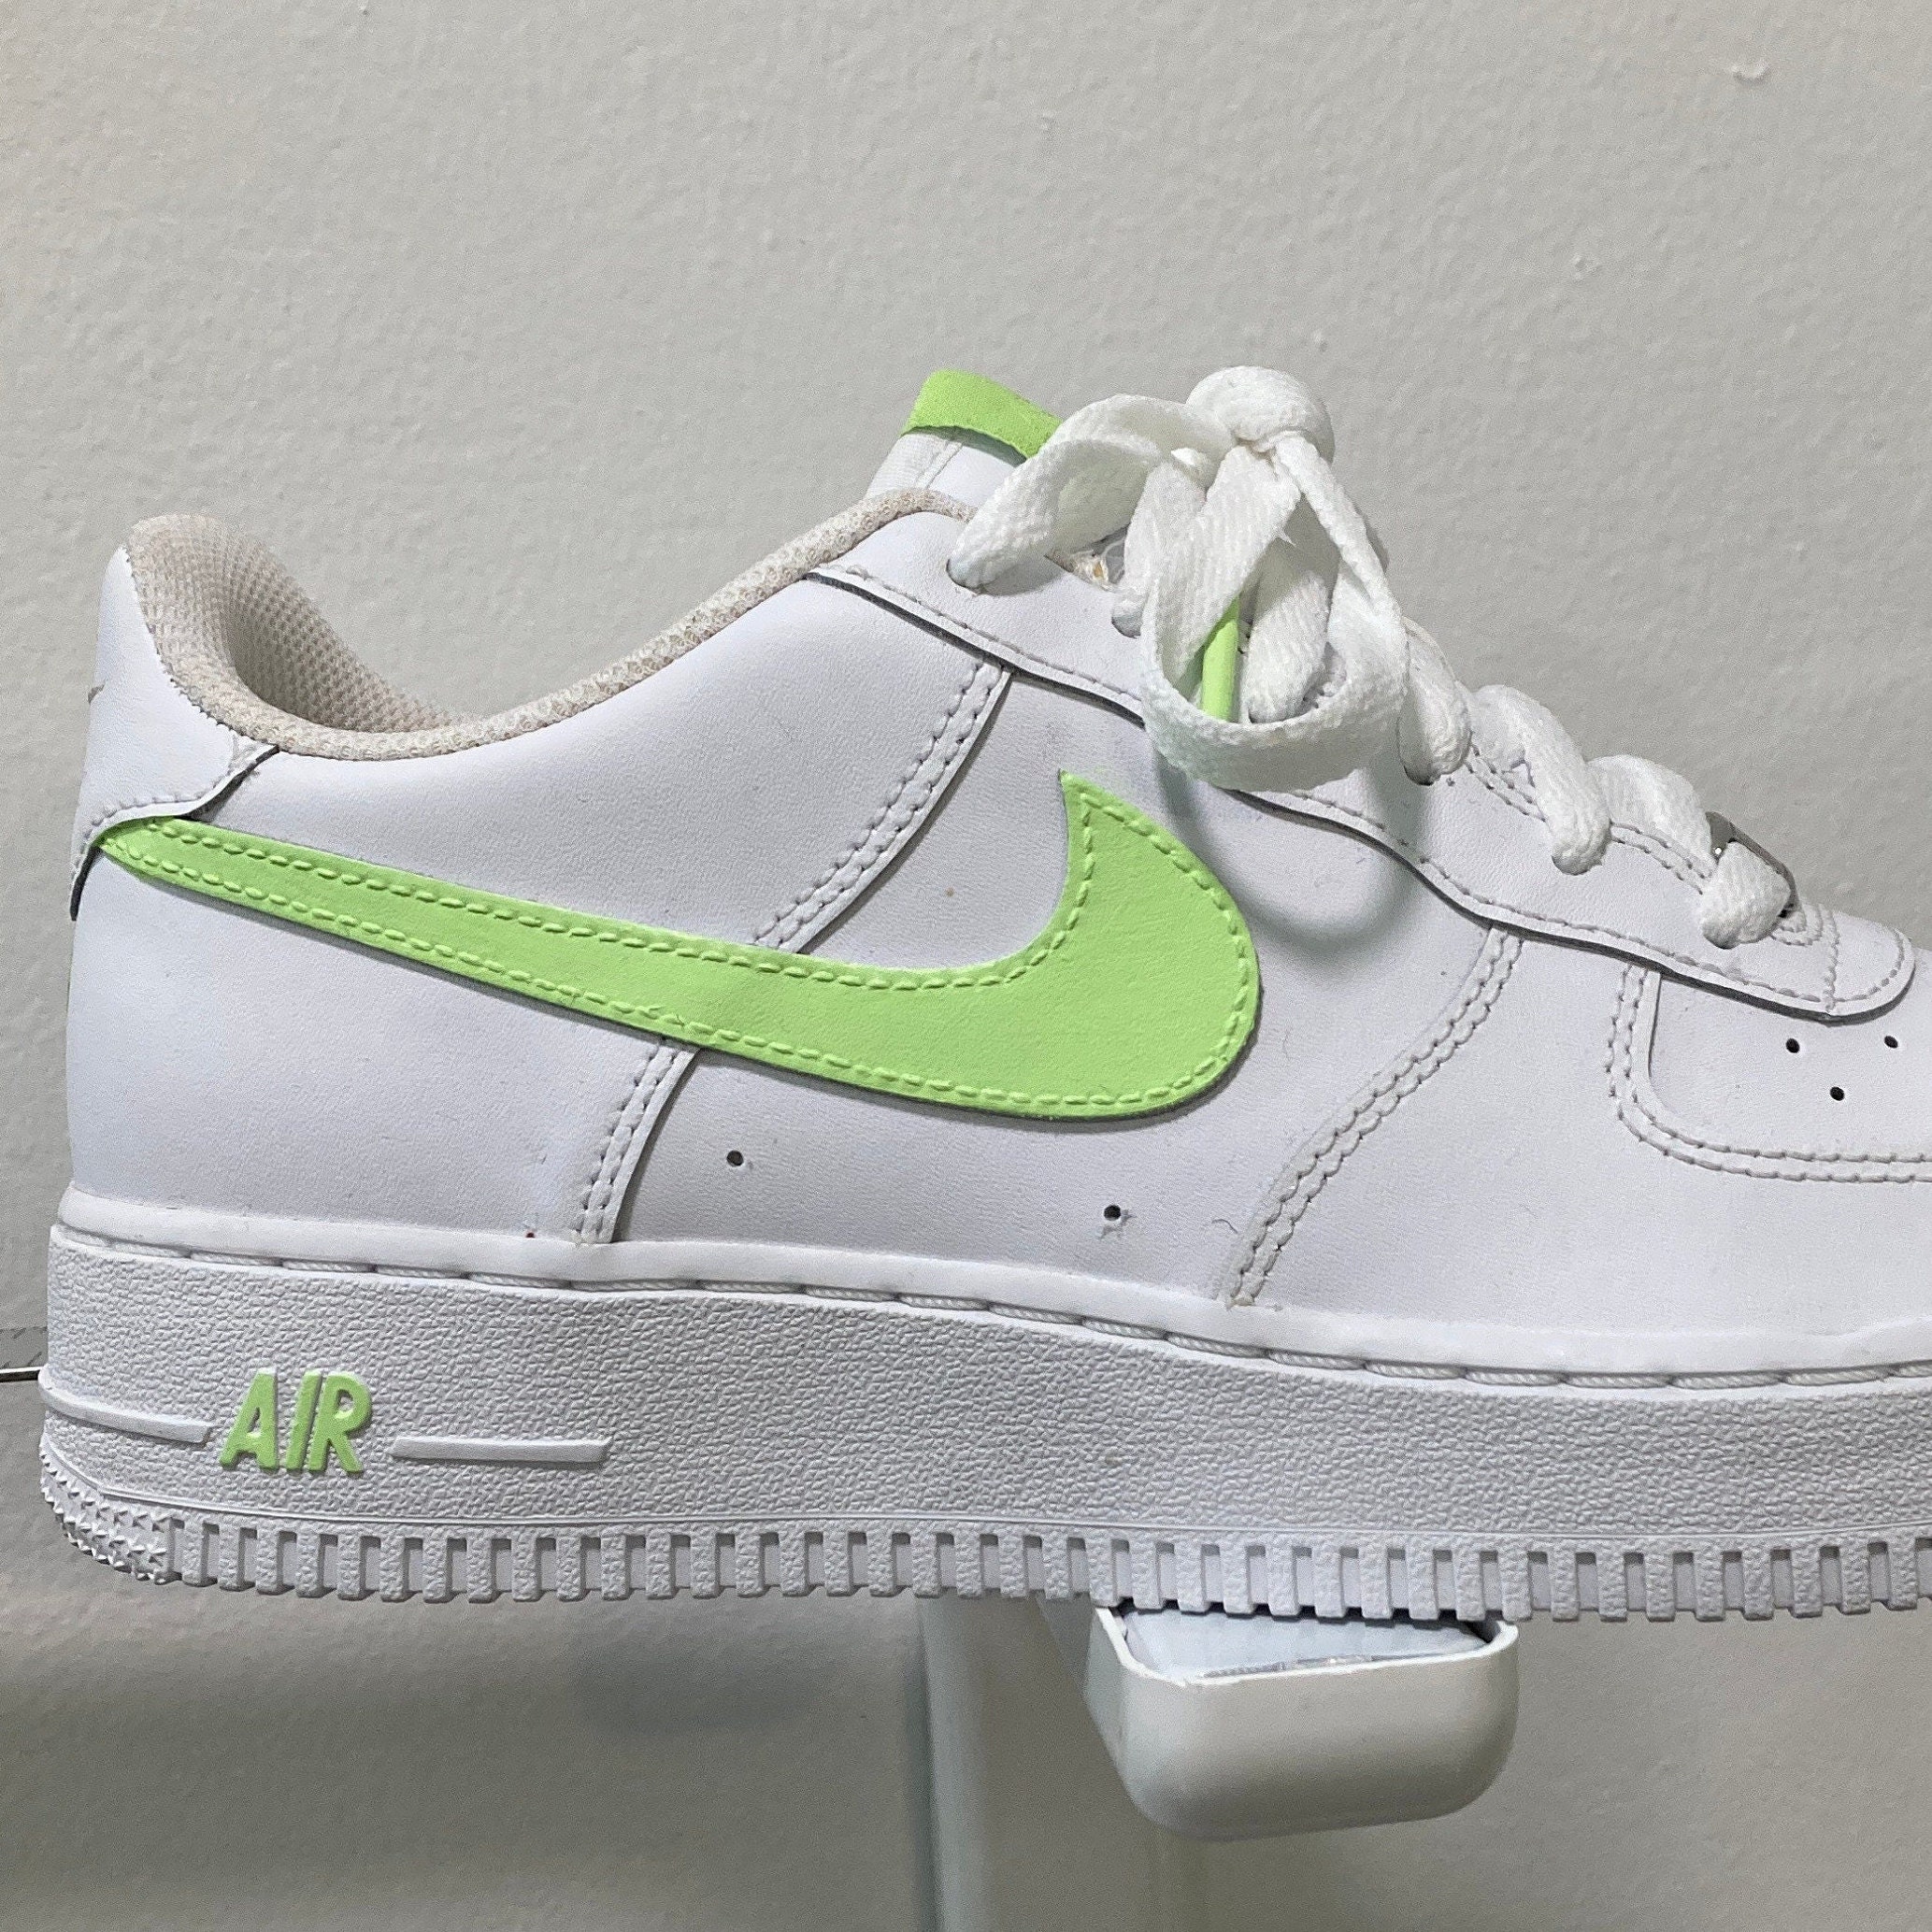 Vergadering iets Ruimteschip Custom Painted Pale Lime Green Nike Air Force 1 Size 6.5 - Etsy